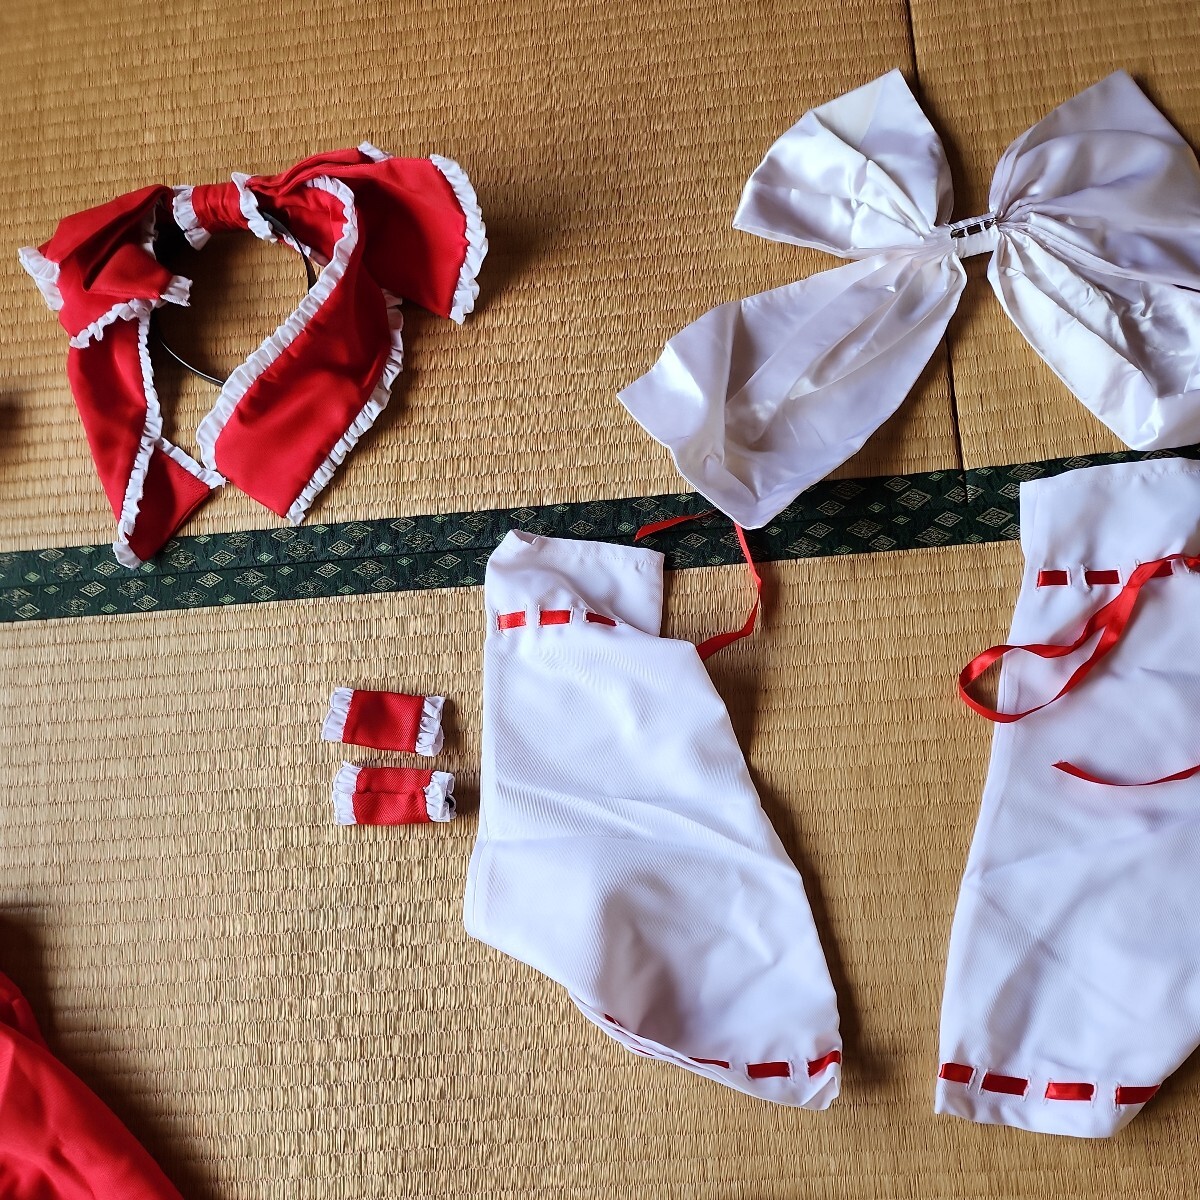  higashi person Project. beauty . dream S size shoes 23 centimeter one jpy start cosplay .. white . red .... making large Katyusha . ribbon . dressing up 